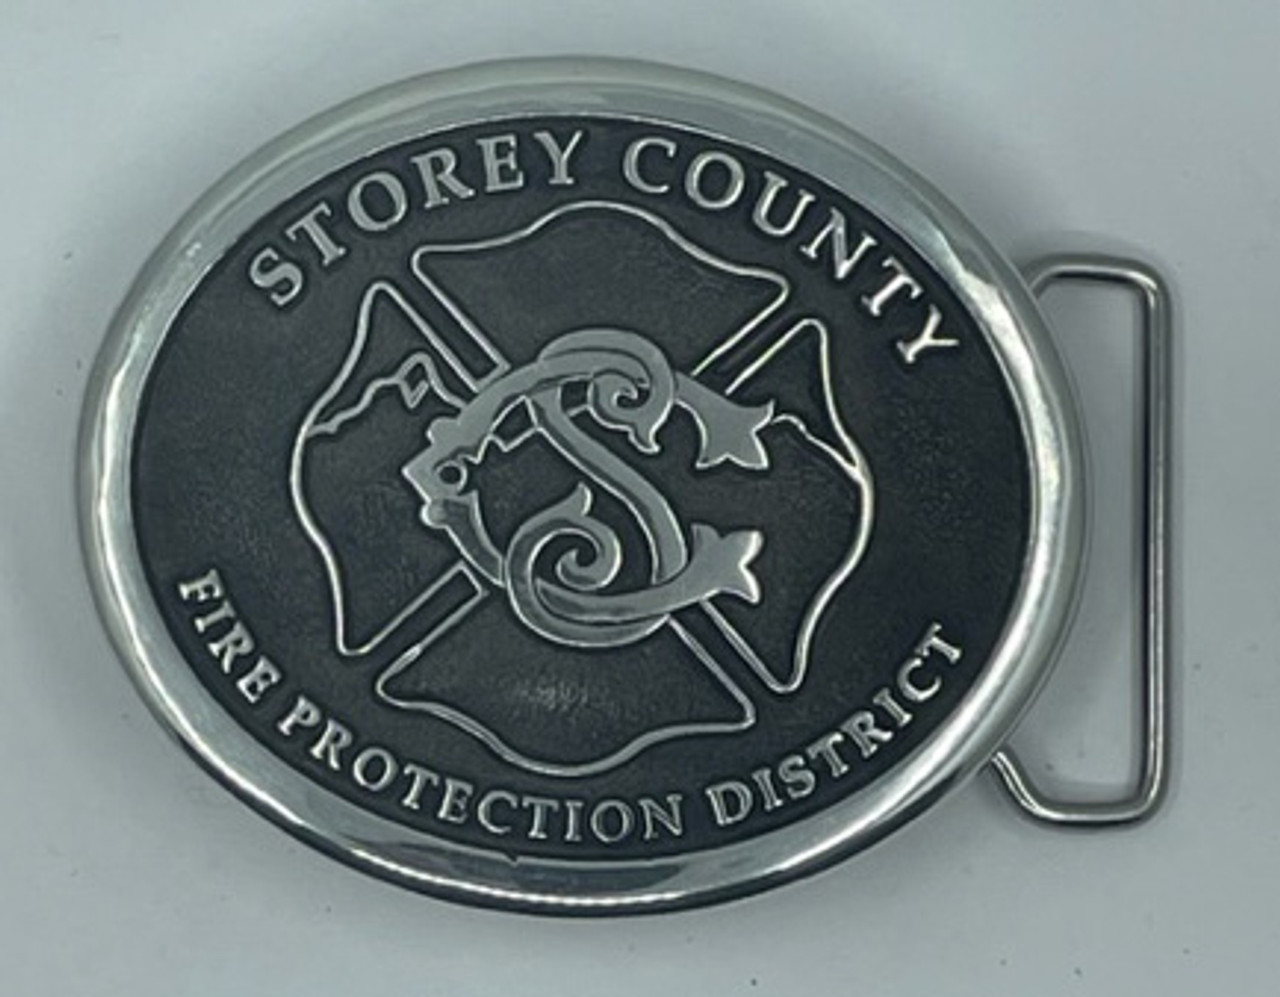 Storey County Fire Protection District Buckle (RESTRICTED)